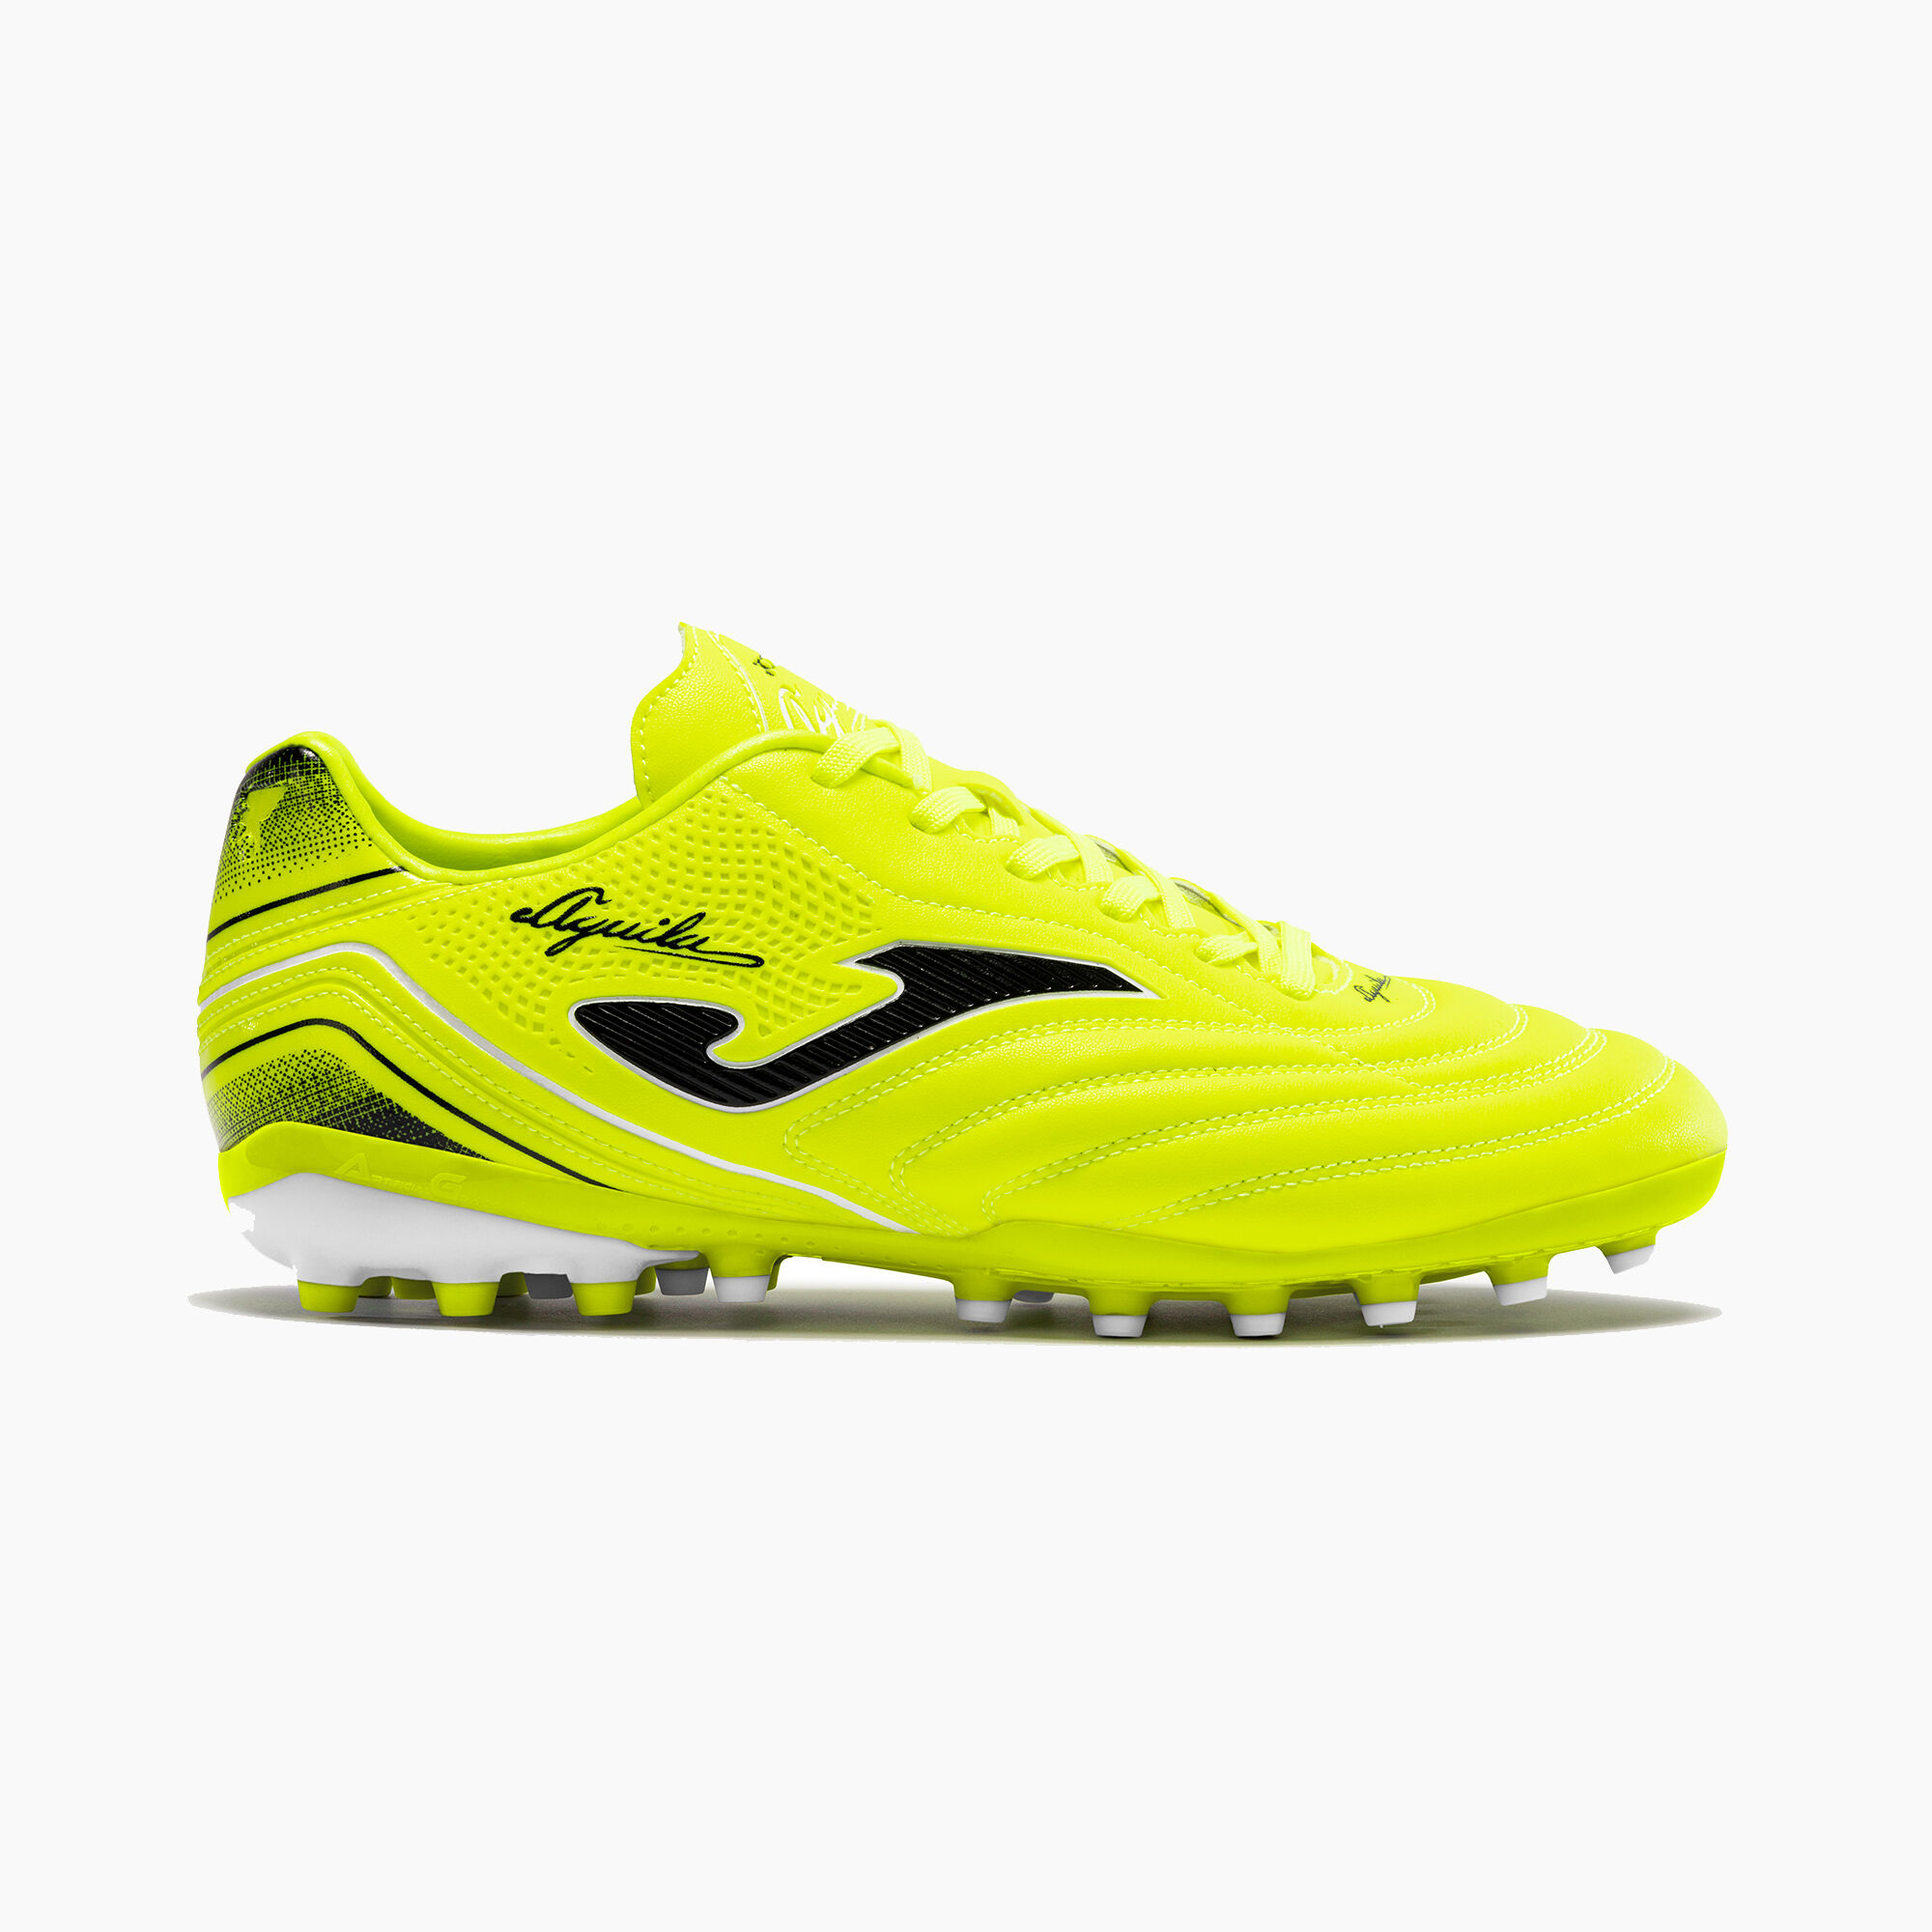 Chaussures football Aguila 24 gazon synthétique AG jaune fluo